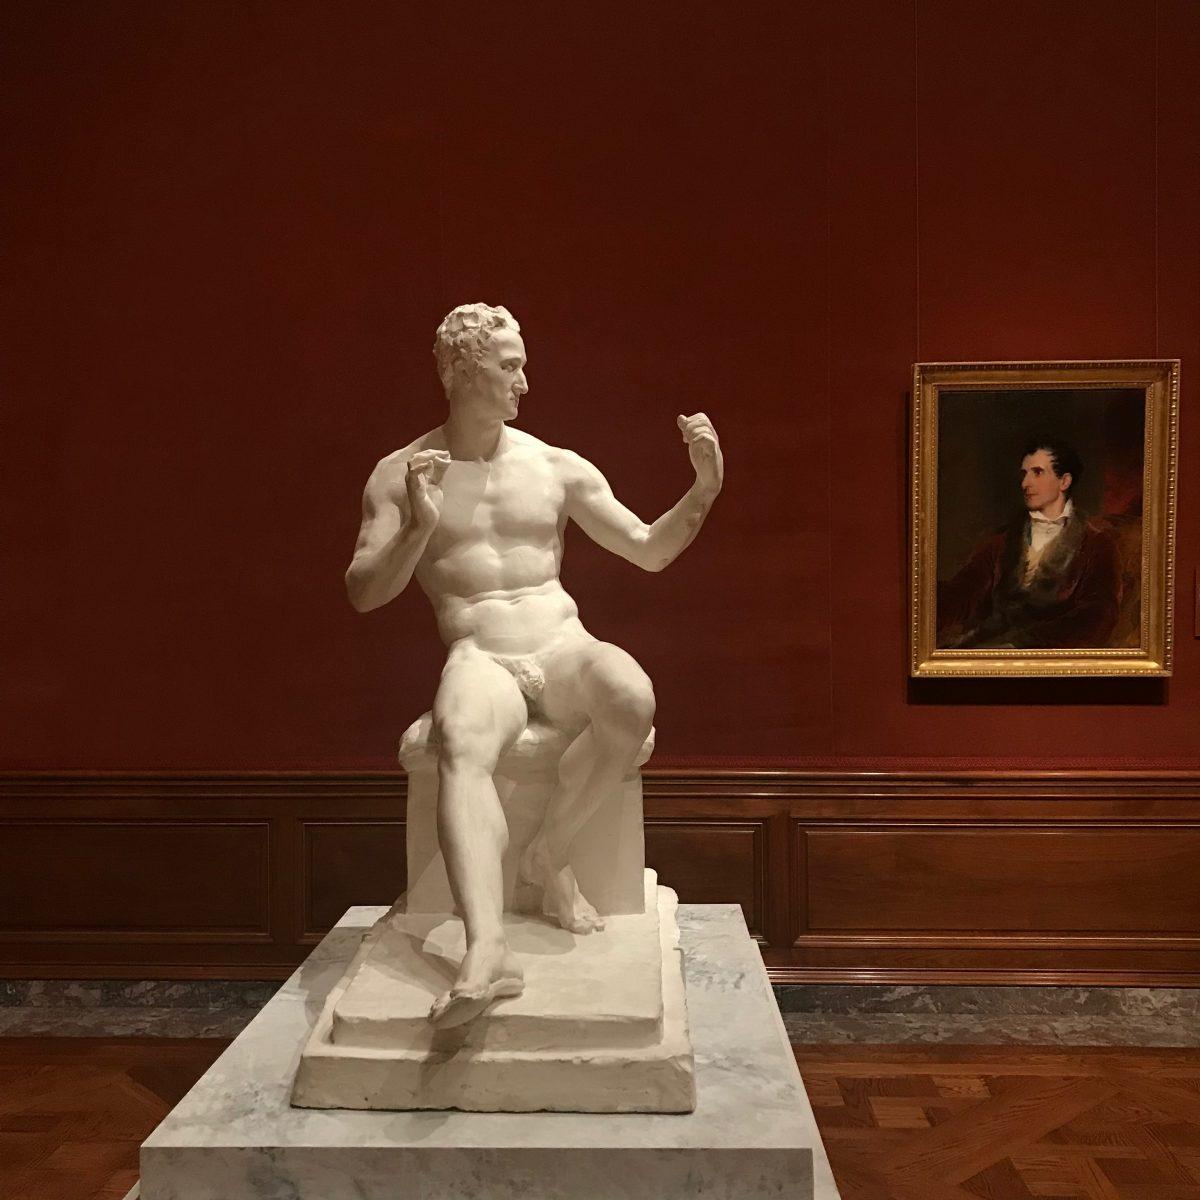 "Bozzetto (sketch) for George Washington," 1817, by Antonio Canova (1757–1822). Plaster, 31 1/2 inches by 18 1/8 inches by 26 3/4 inches, Gypsotheca e Museo Antonio Canova, in the exhibition at The Frick Collection on May 21, 2018. (Milene Fernandez/The Epoch Times)